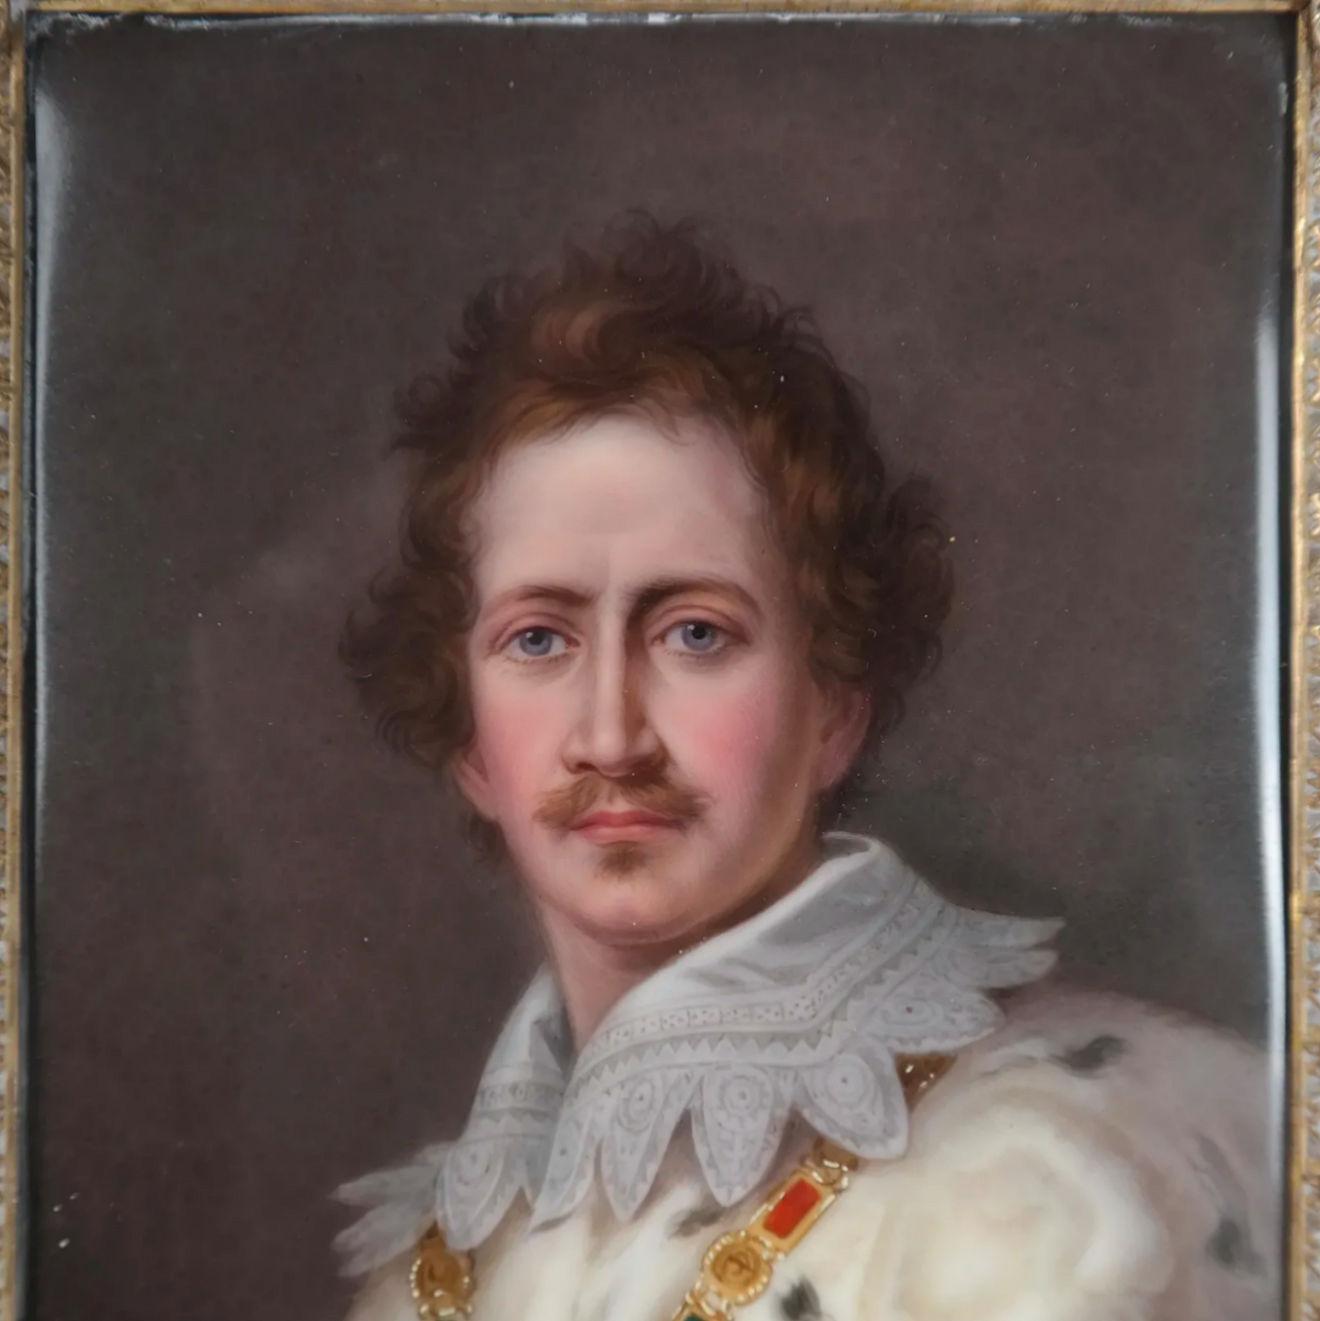 19th Century Porcelain Plaques of King Ludwig I and Countess of Bavaria